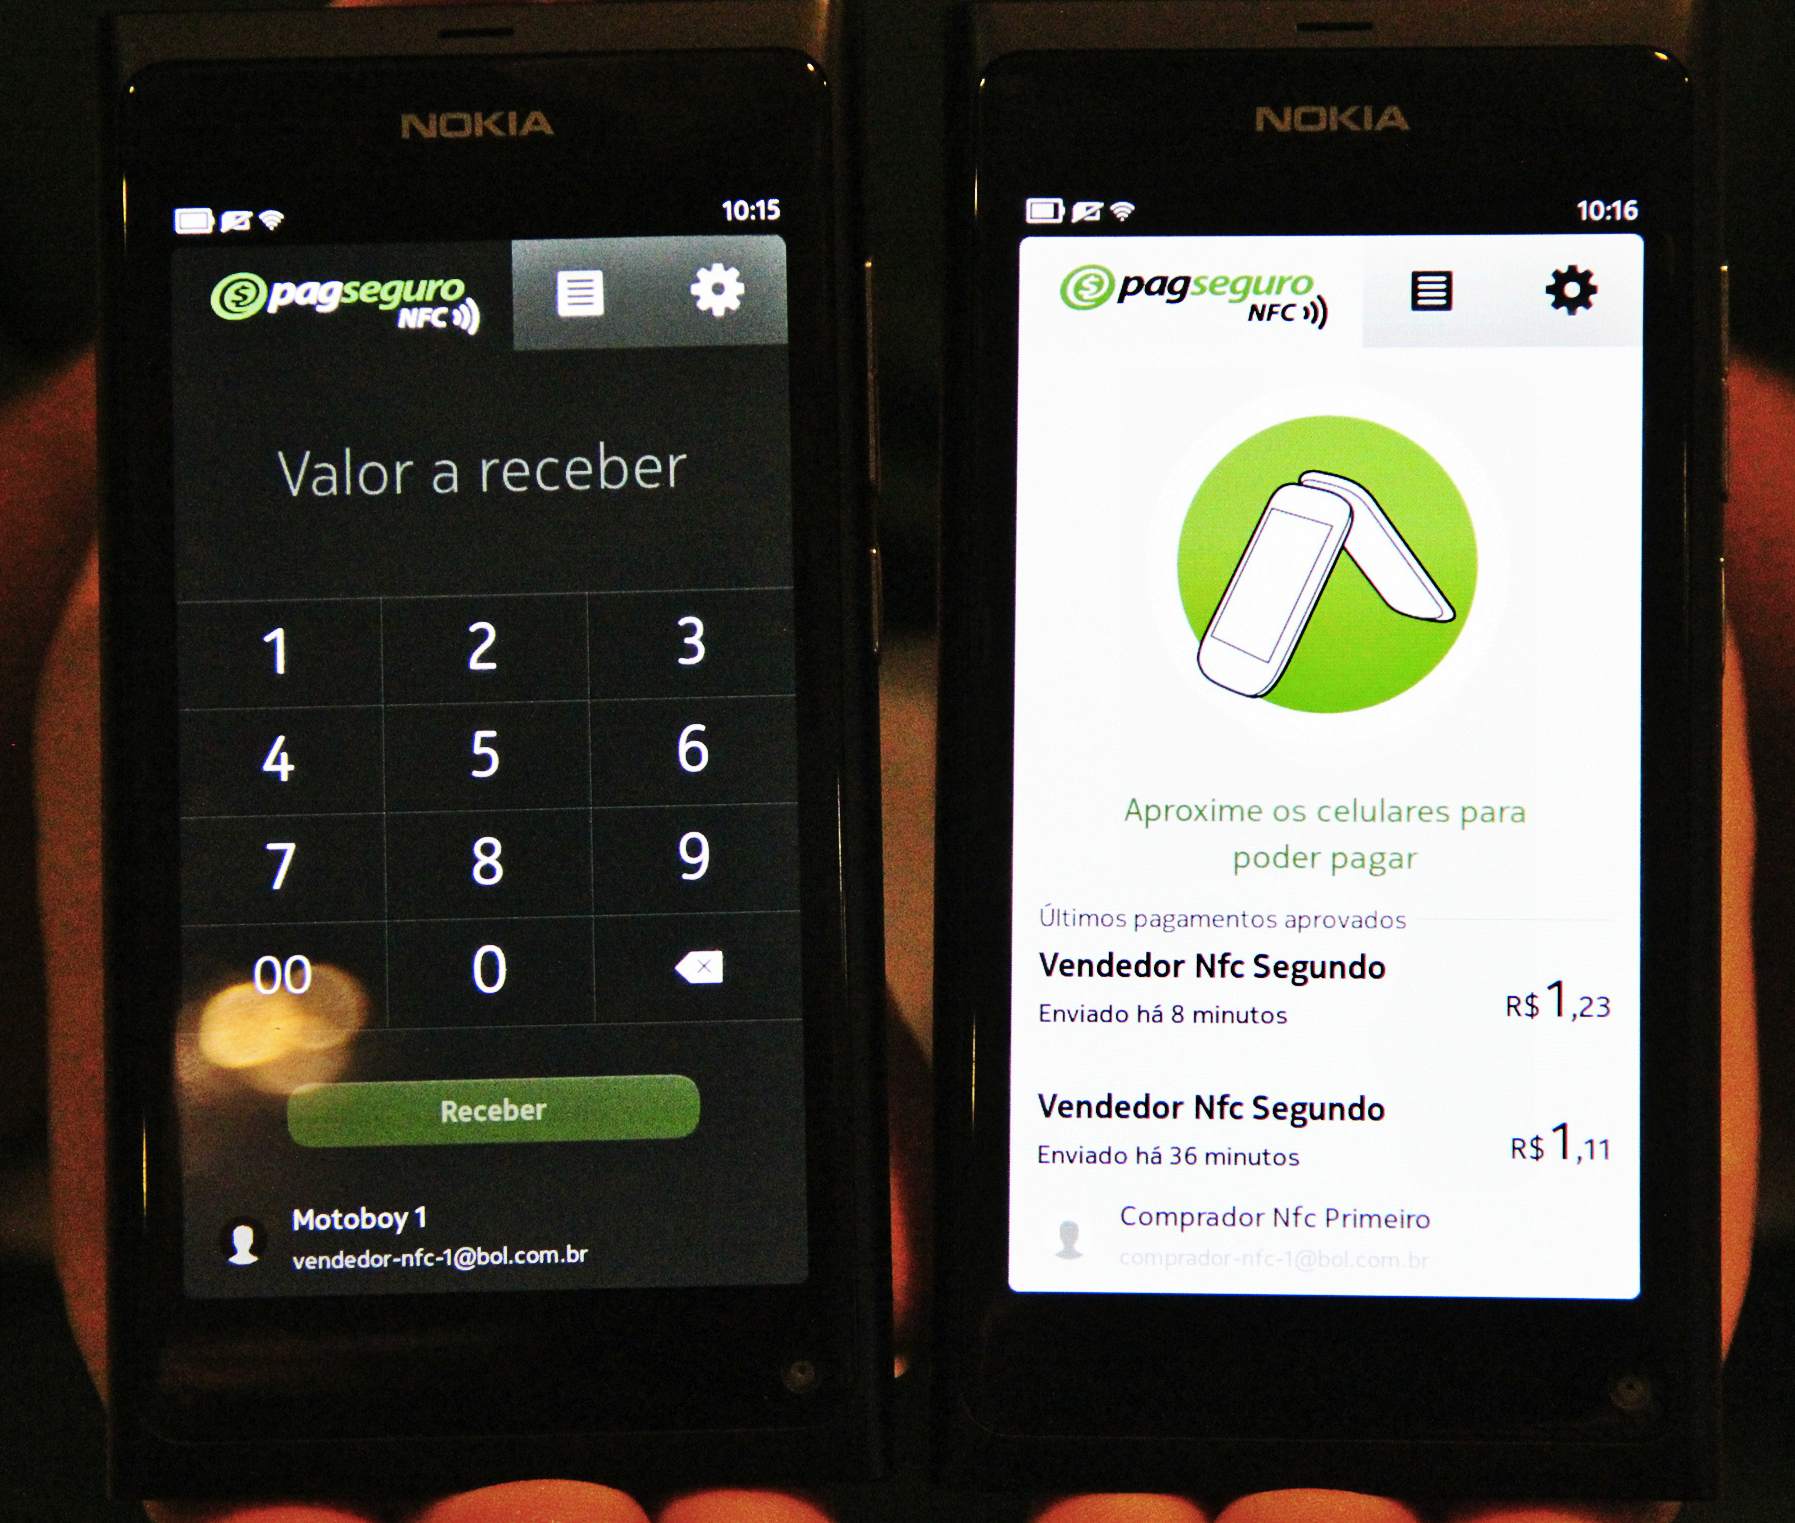 Brazilian Company Launches NFC P2P Payments with Nokia App